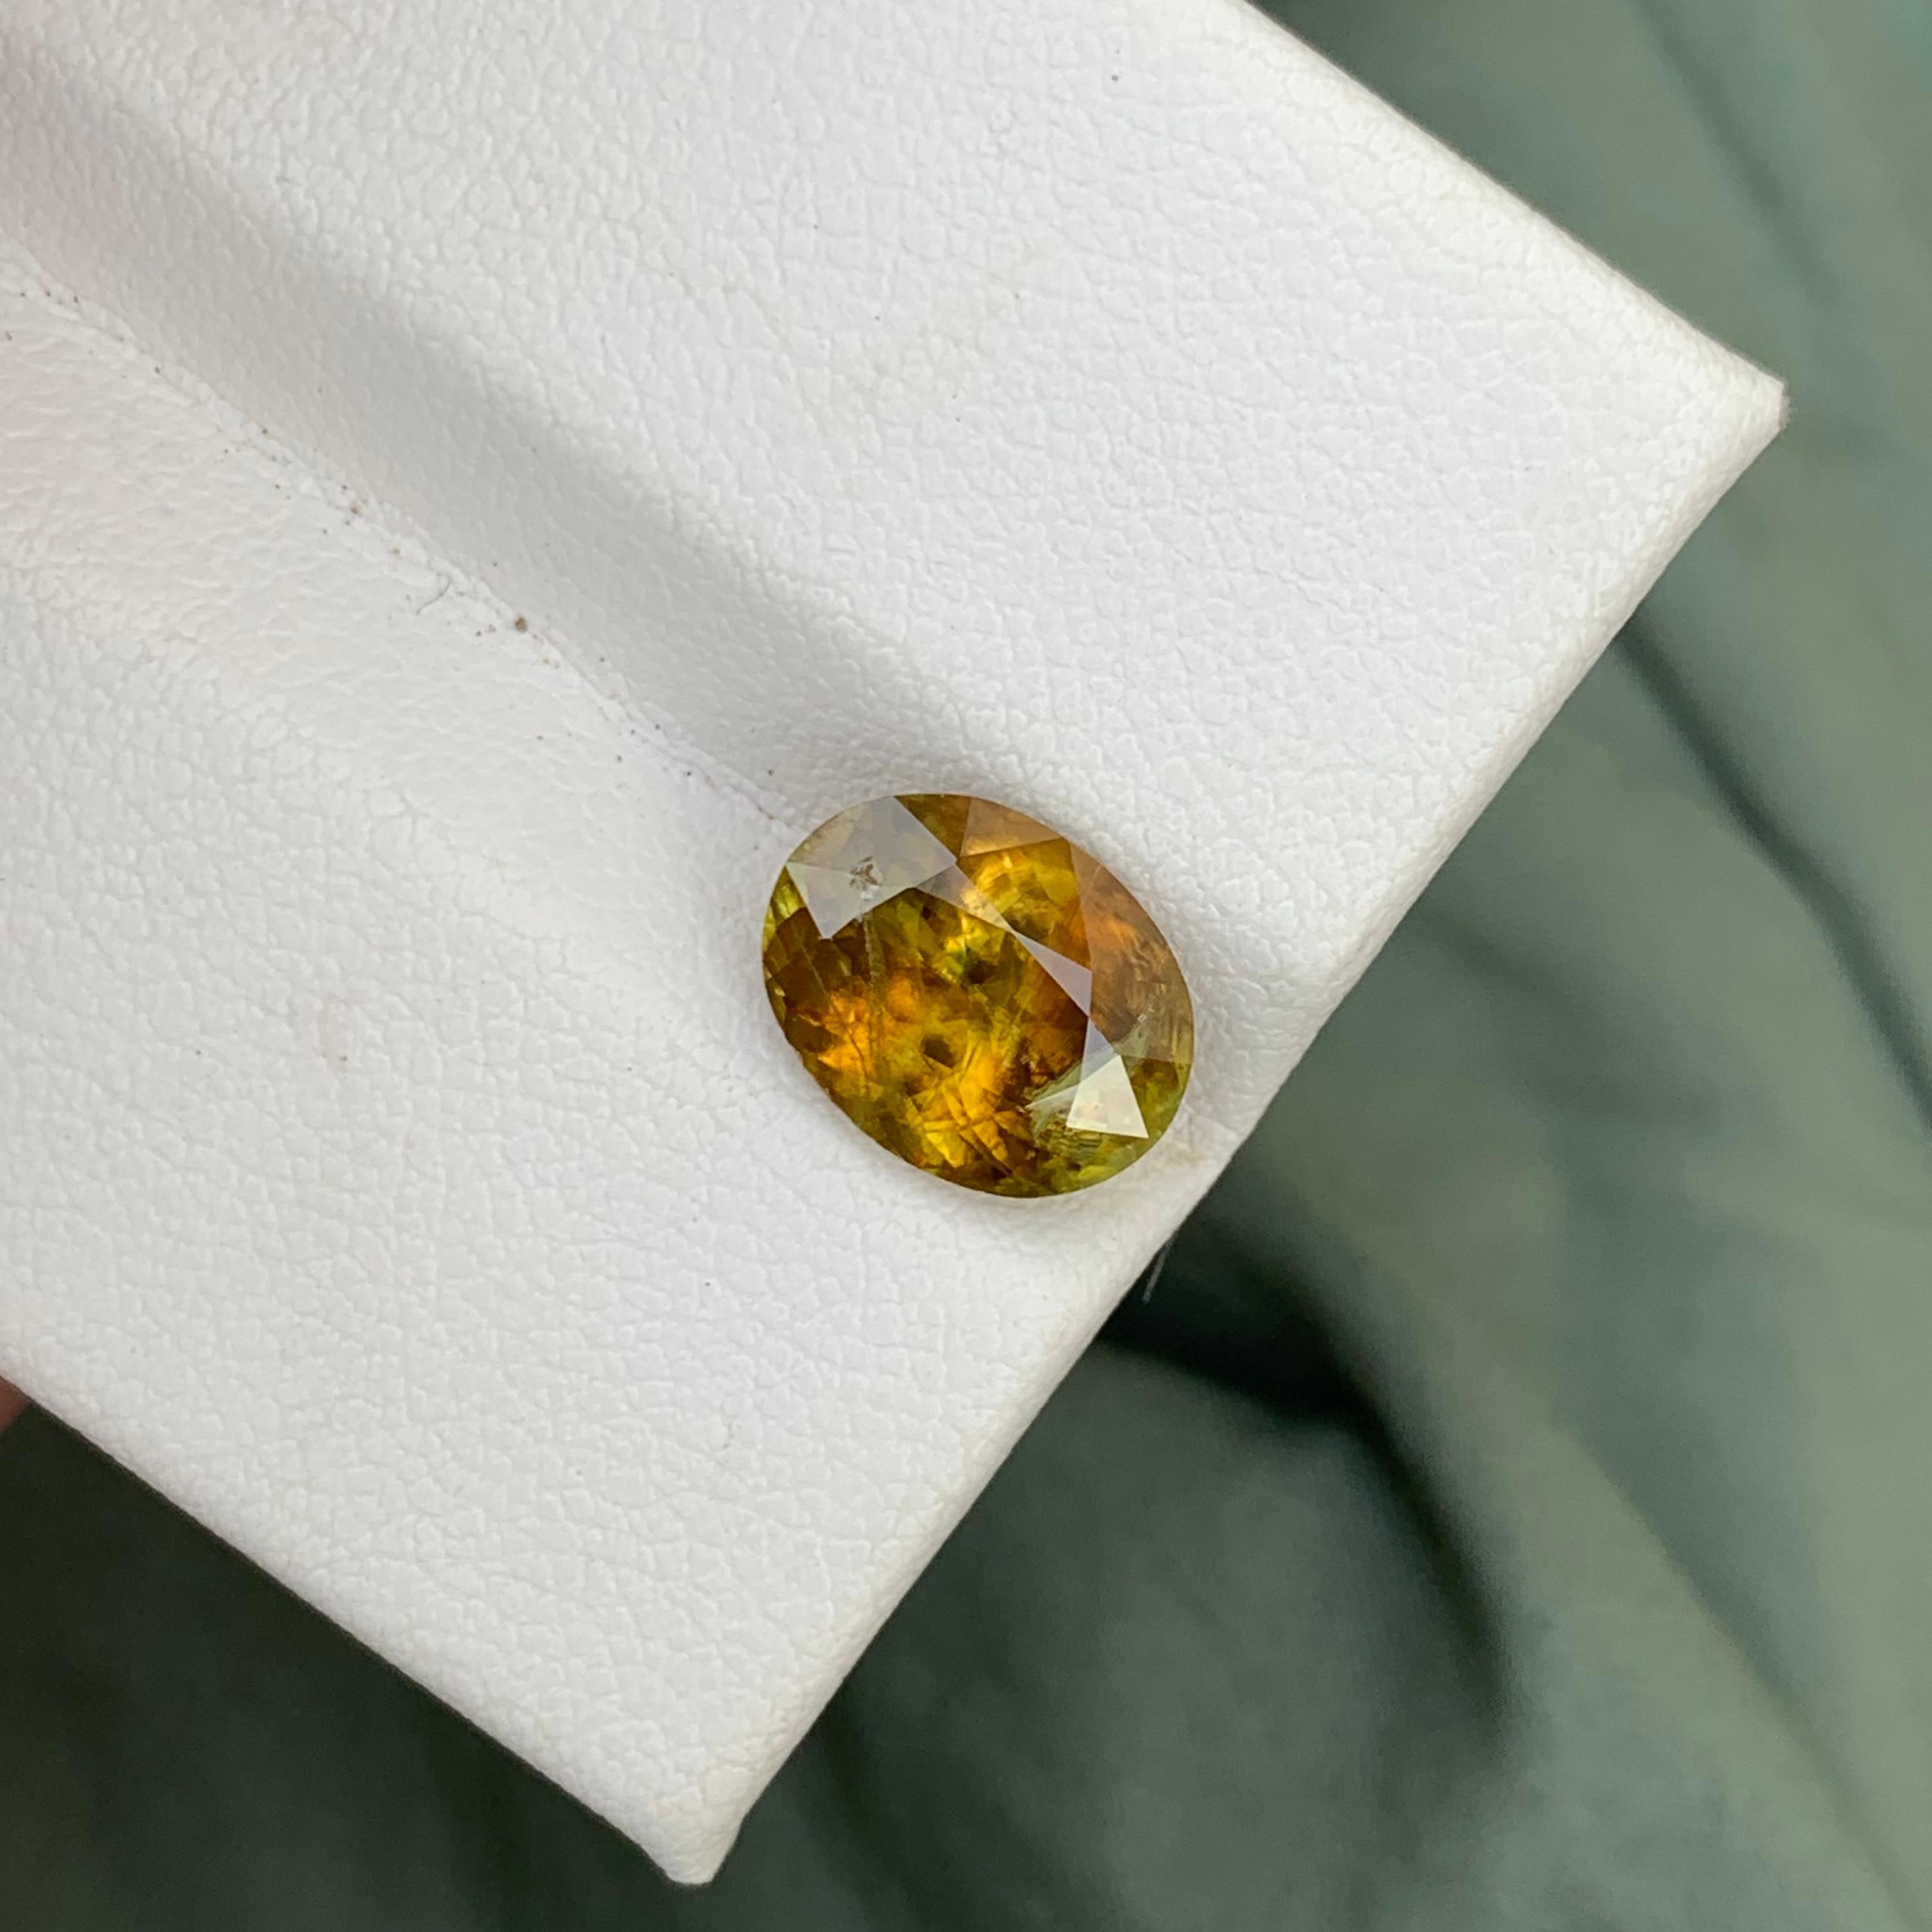 3.30 Cts Natural Loose Fire Titanite Sphene Oval Ring Gem From Pakistan Mine For Sale 2